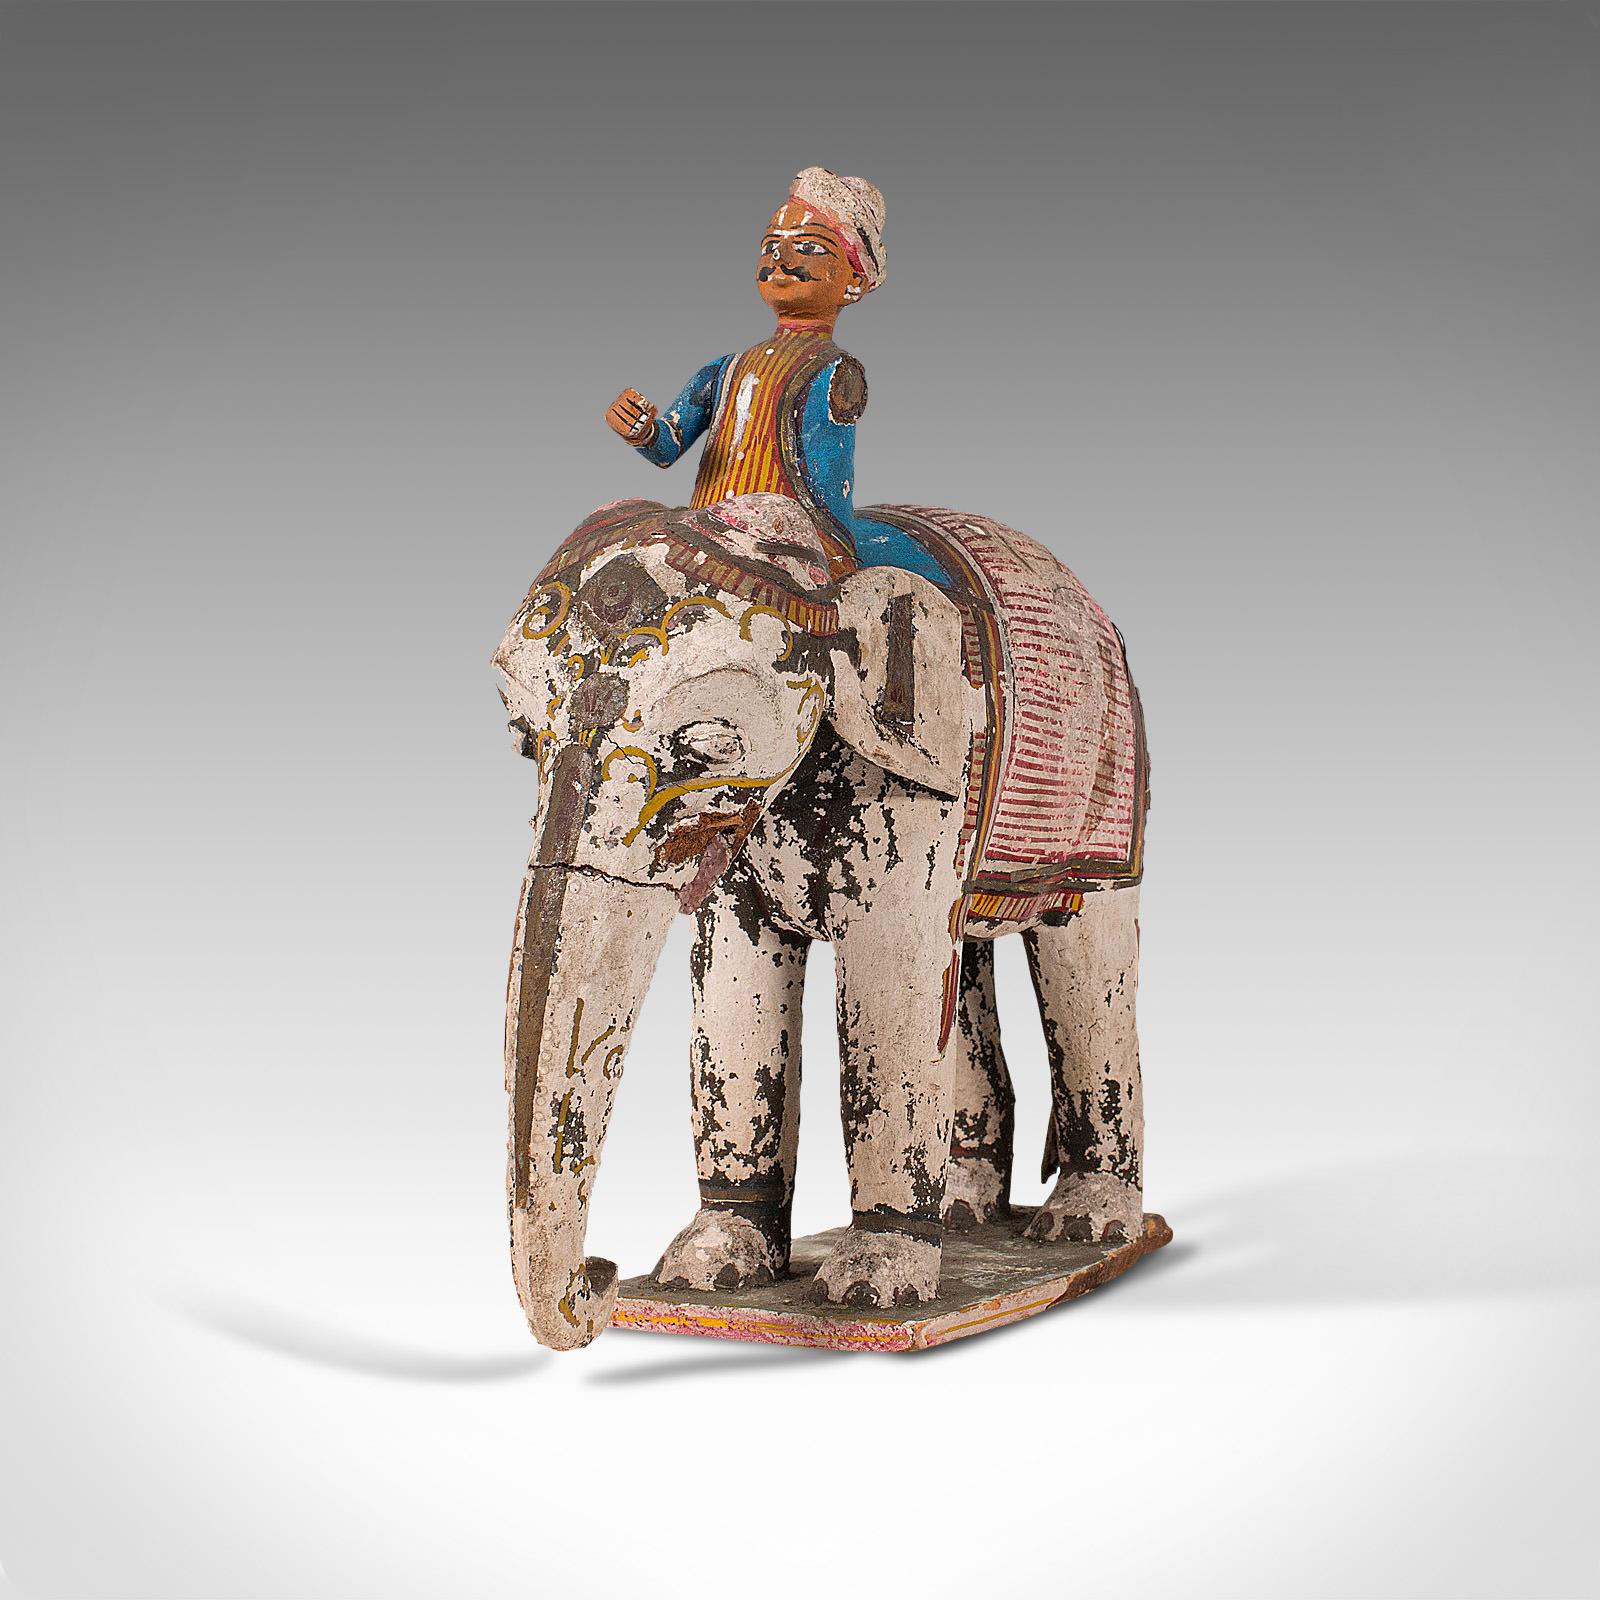 Antique Decorative Elephant and Rider, Indian, Hand Painted, Figure, Victorian In Fair Condition For Sale In Hele, Devon, GB